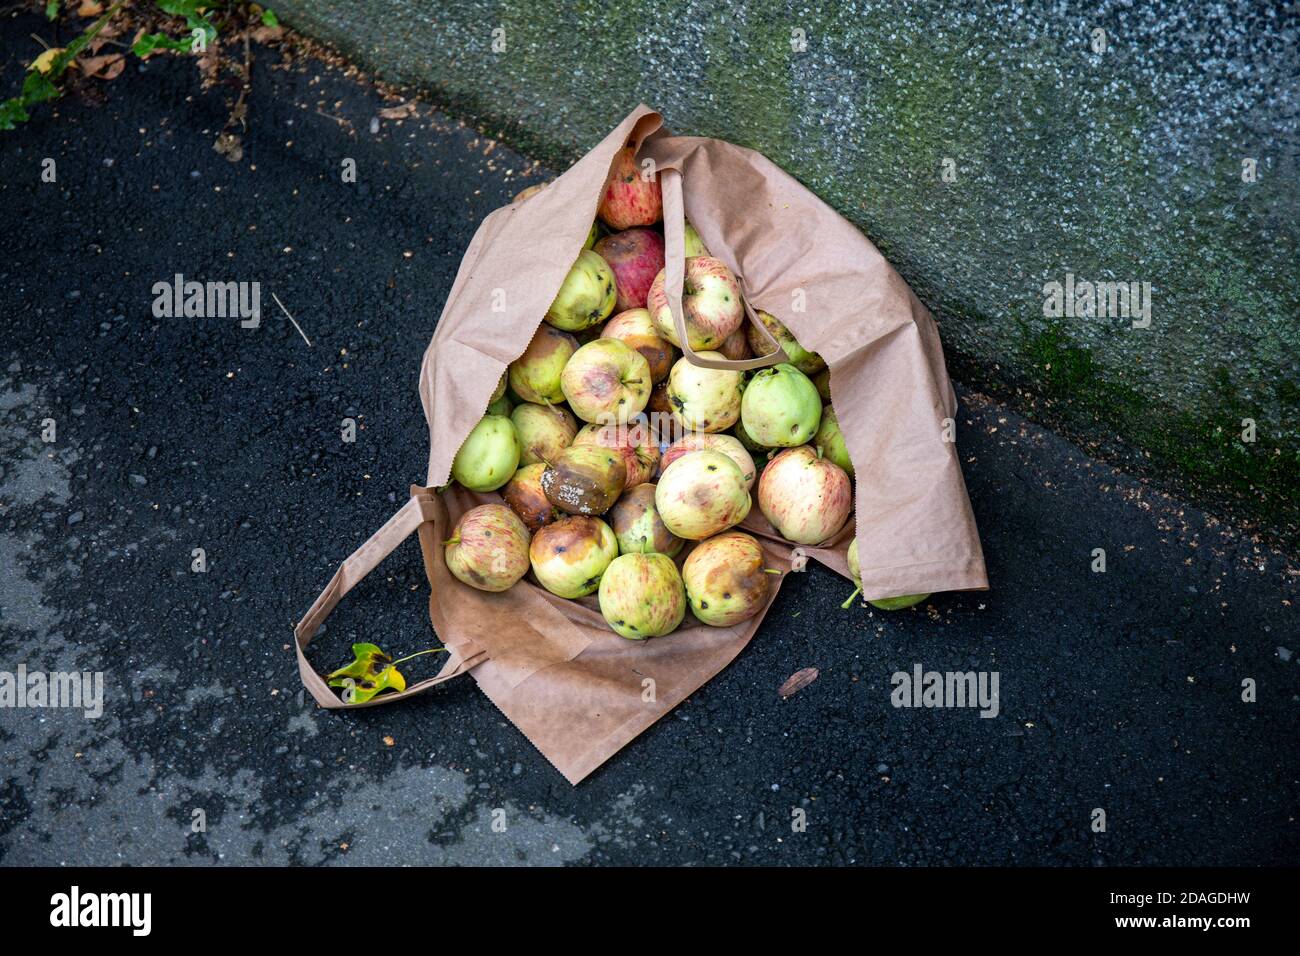 Rotten apples in a paper bag left on pavement Stock Photo